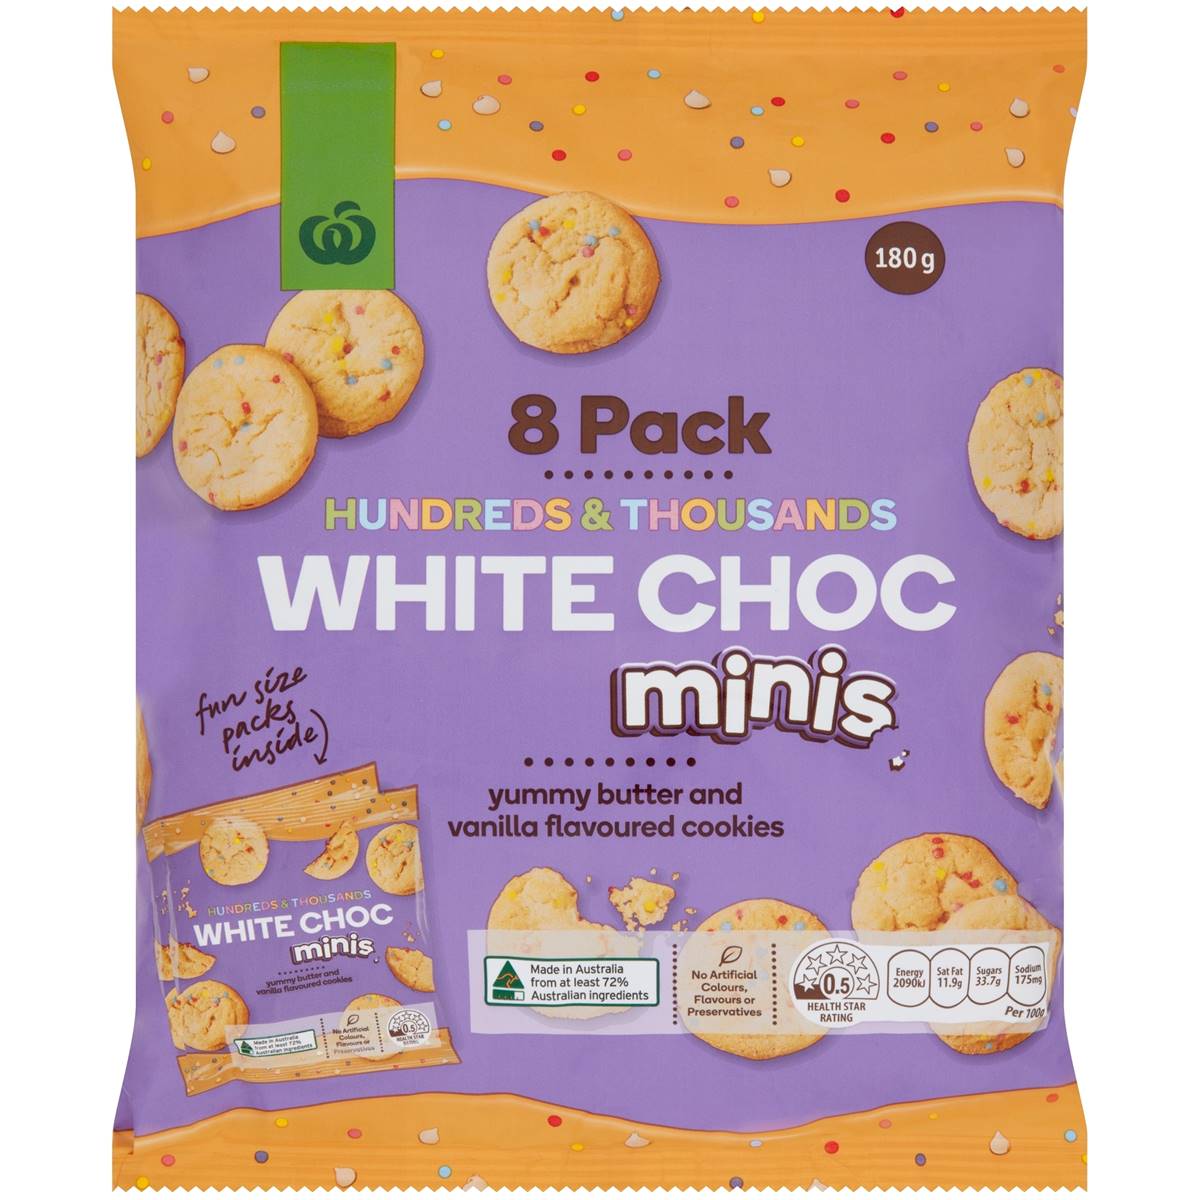 Calories in Woolworths Hundreds & Thousands White Choc Minis